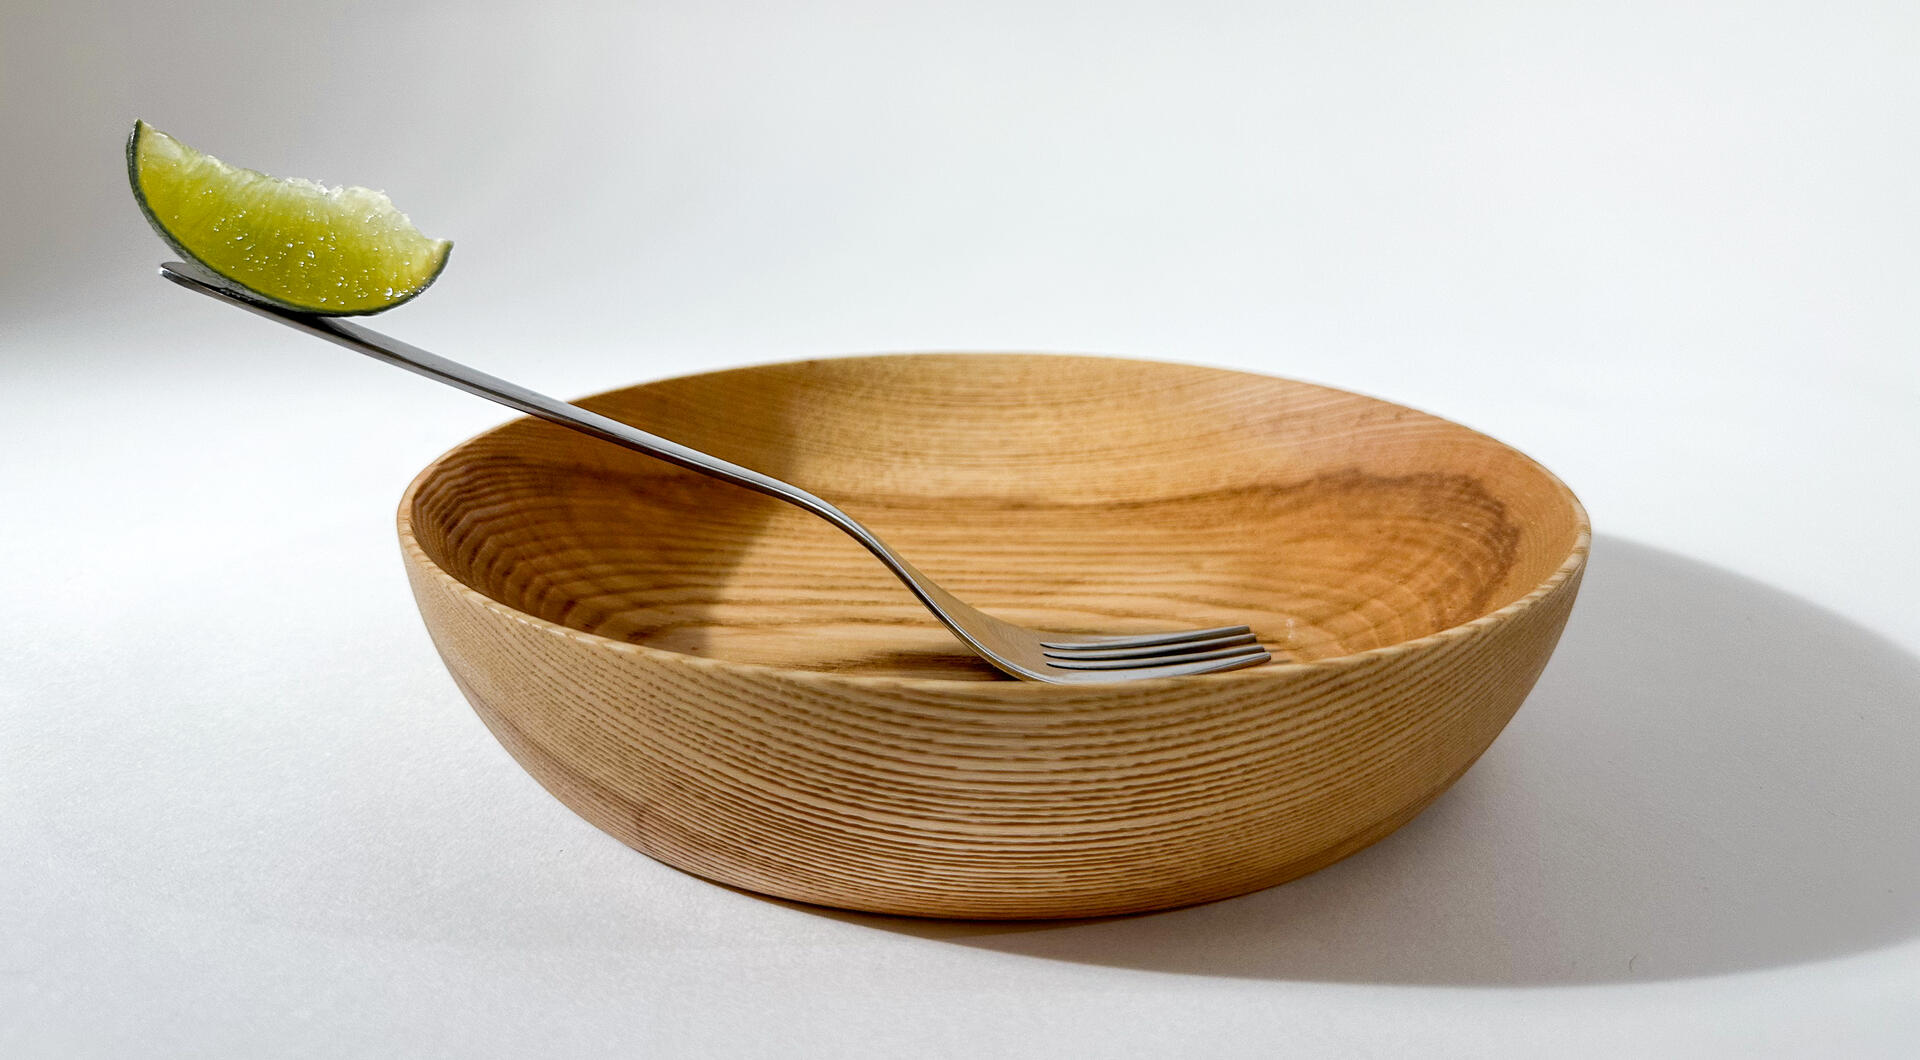 A wooden bowl with a fork magnetically attached to the interior, with a slice of lime balancing on the end of the handle to demonstrate the magnetic pull.